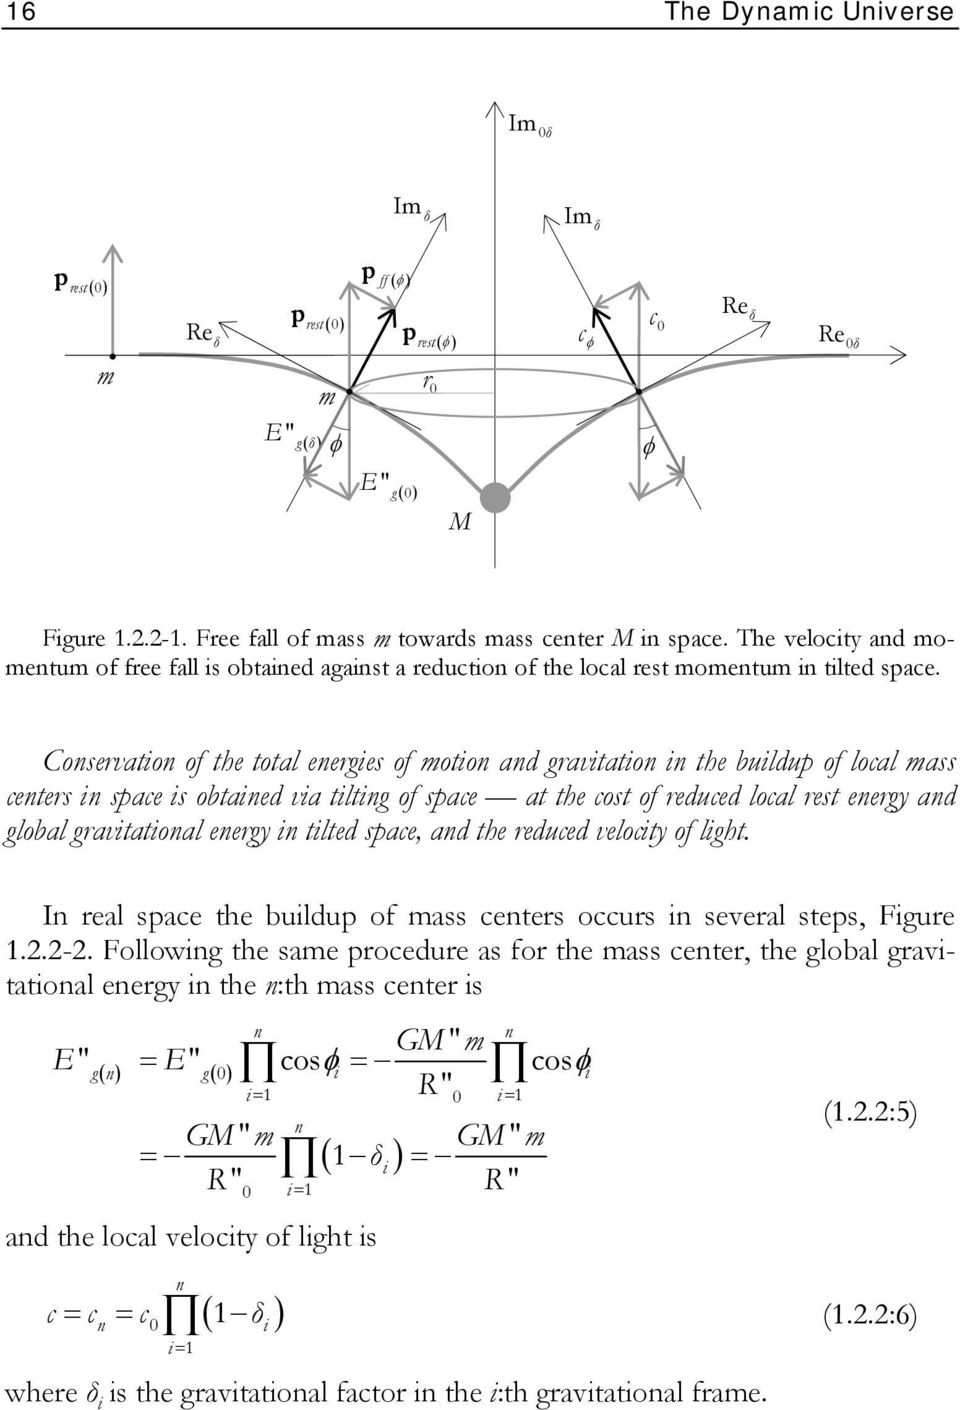 Conservation of the total energies of motion and gravitation in the buildup of local mass centers in space is obtained via tilting of space at the cost of reduced local rest energy and global